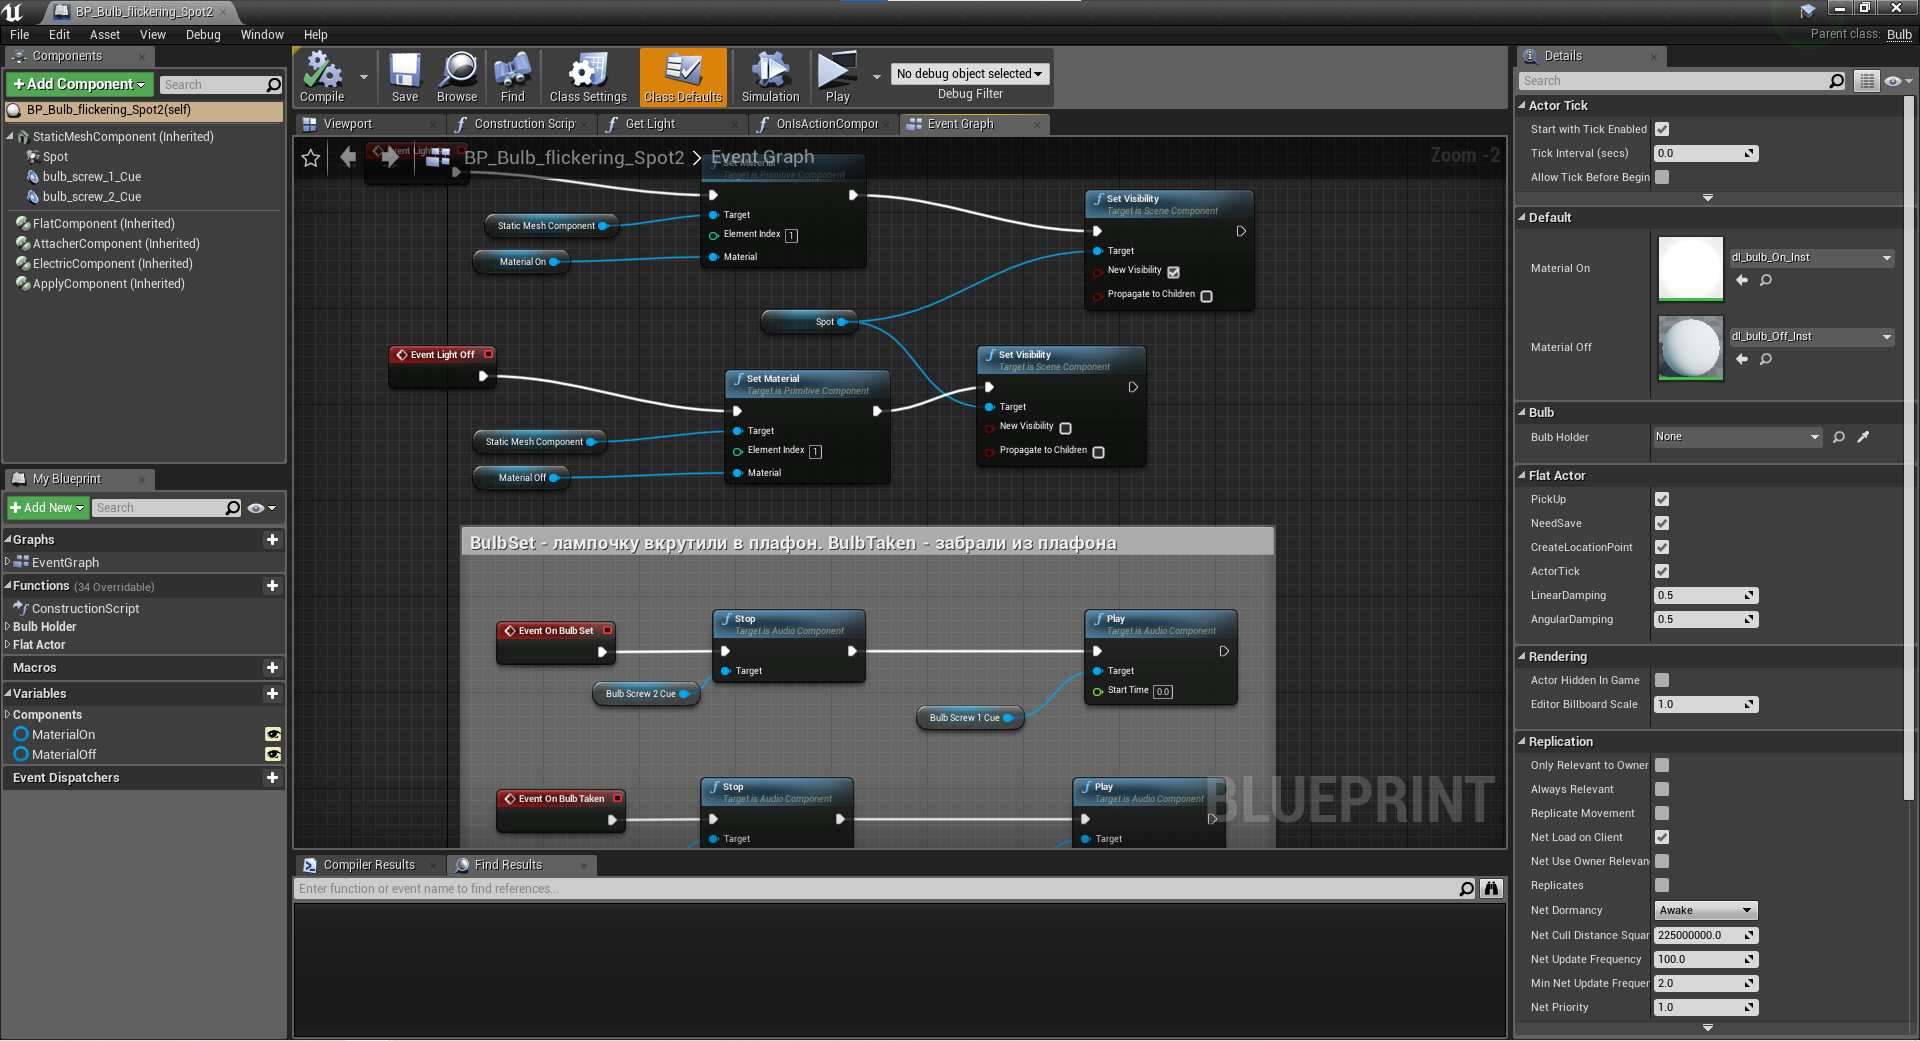 The Blueprint editing page.